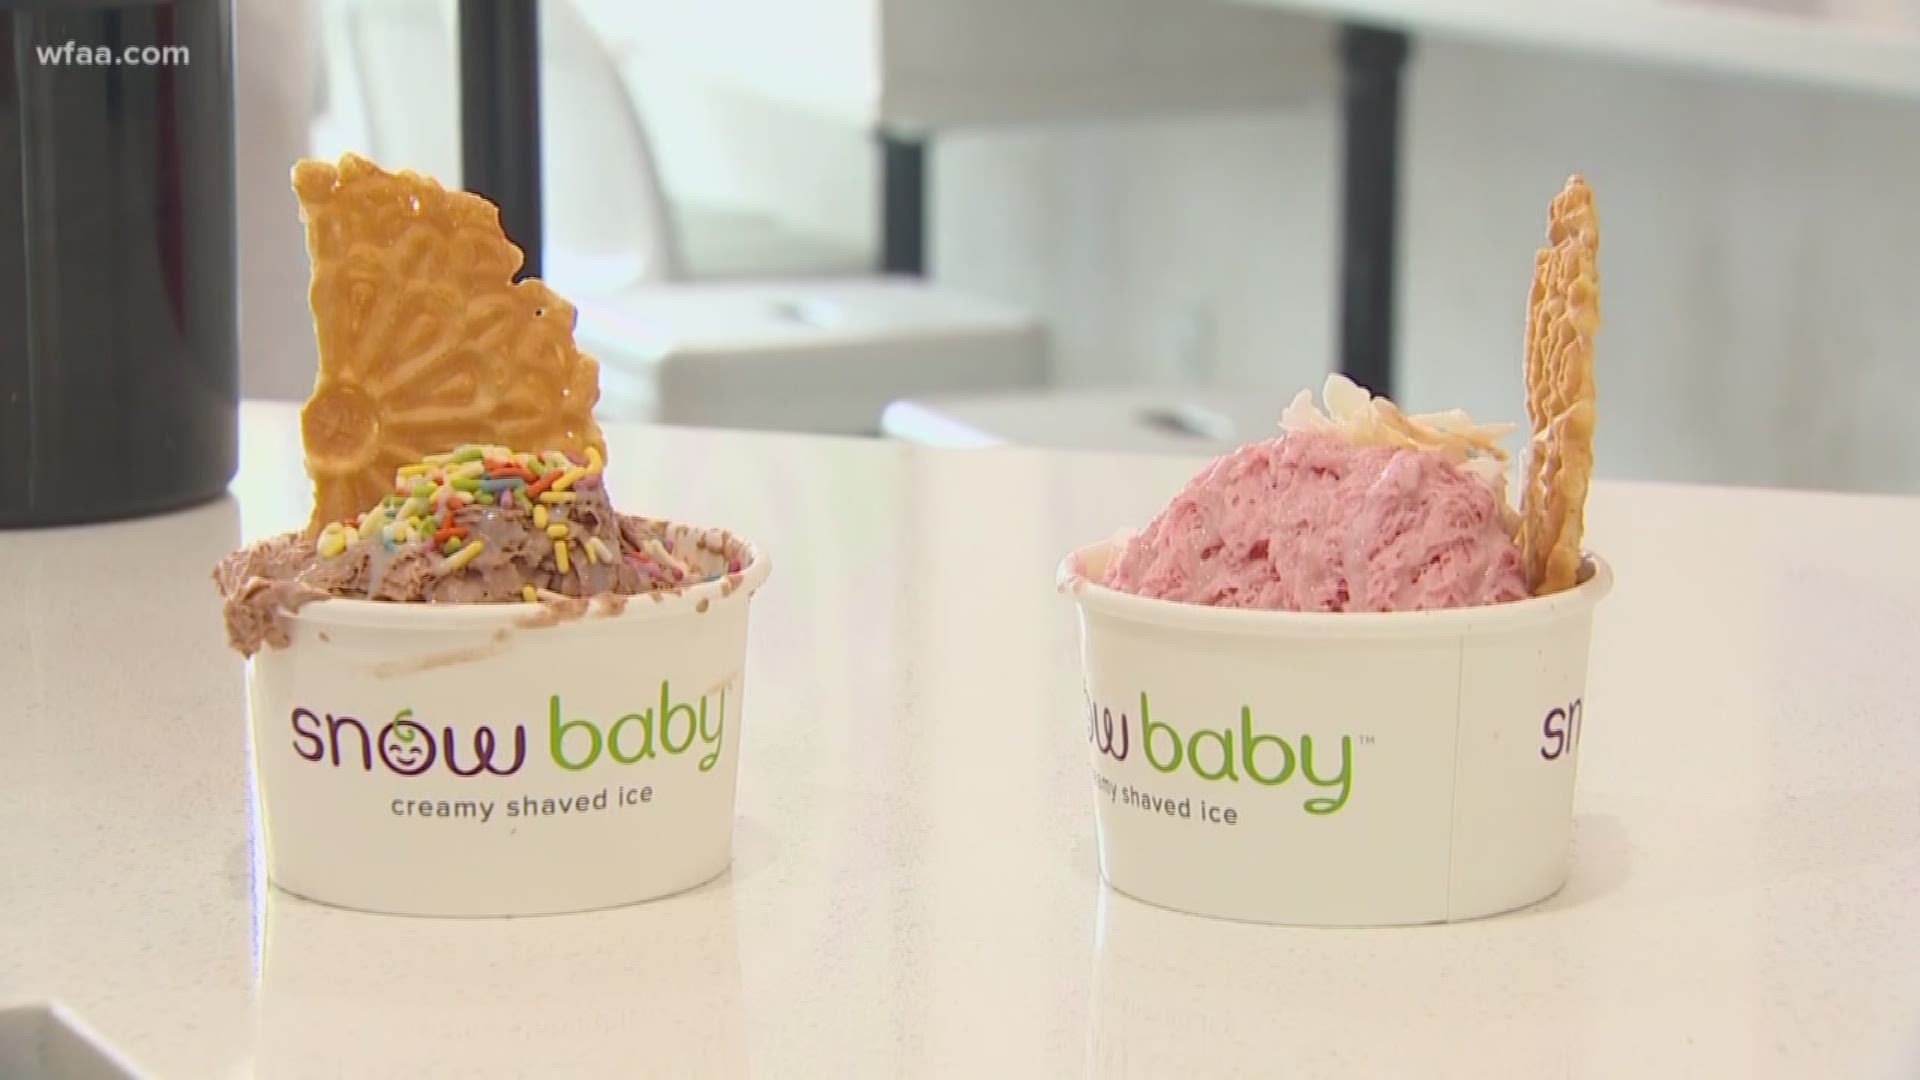 Snowbaby: A healthier dessert for this hot weather